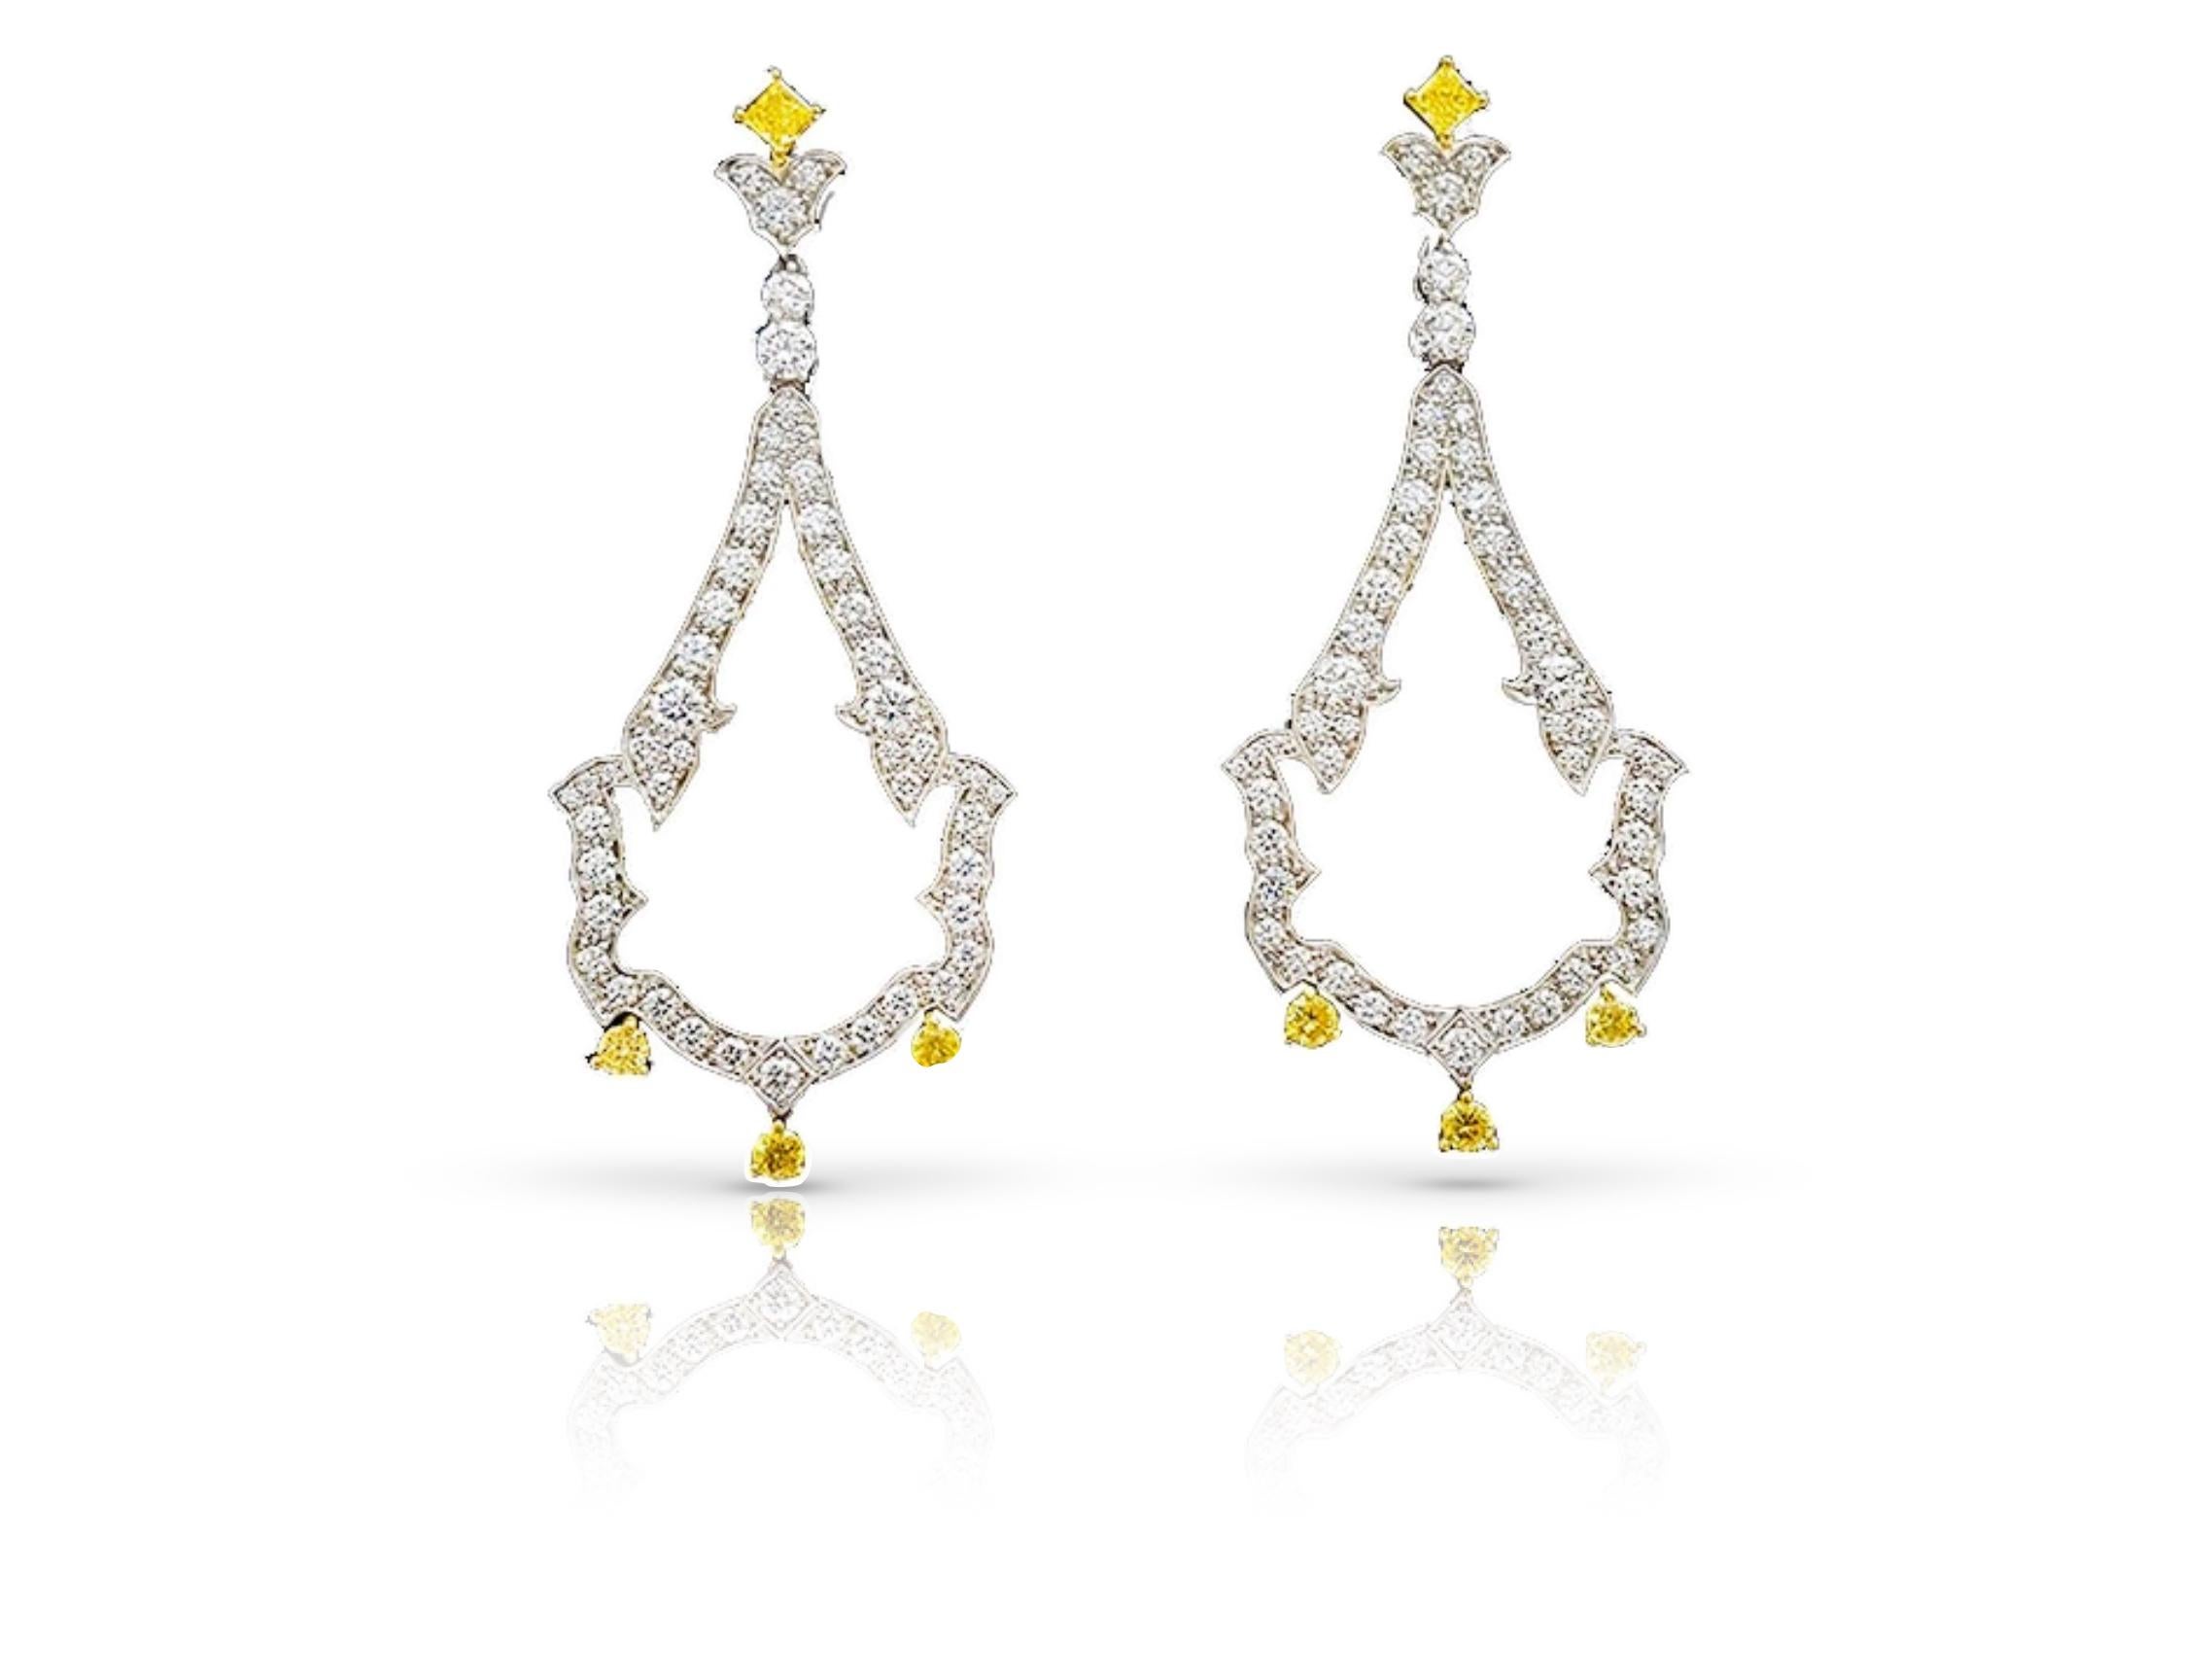 Introducing a truly magnificent and elegant pair of Open-Work Dangle Earrings, showcasing a harmonious blend of yellow and colorless round brilliant diamonds F-G color, VS clarity, meticulously set in an open-work pear-shaped design. These exquisite